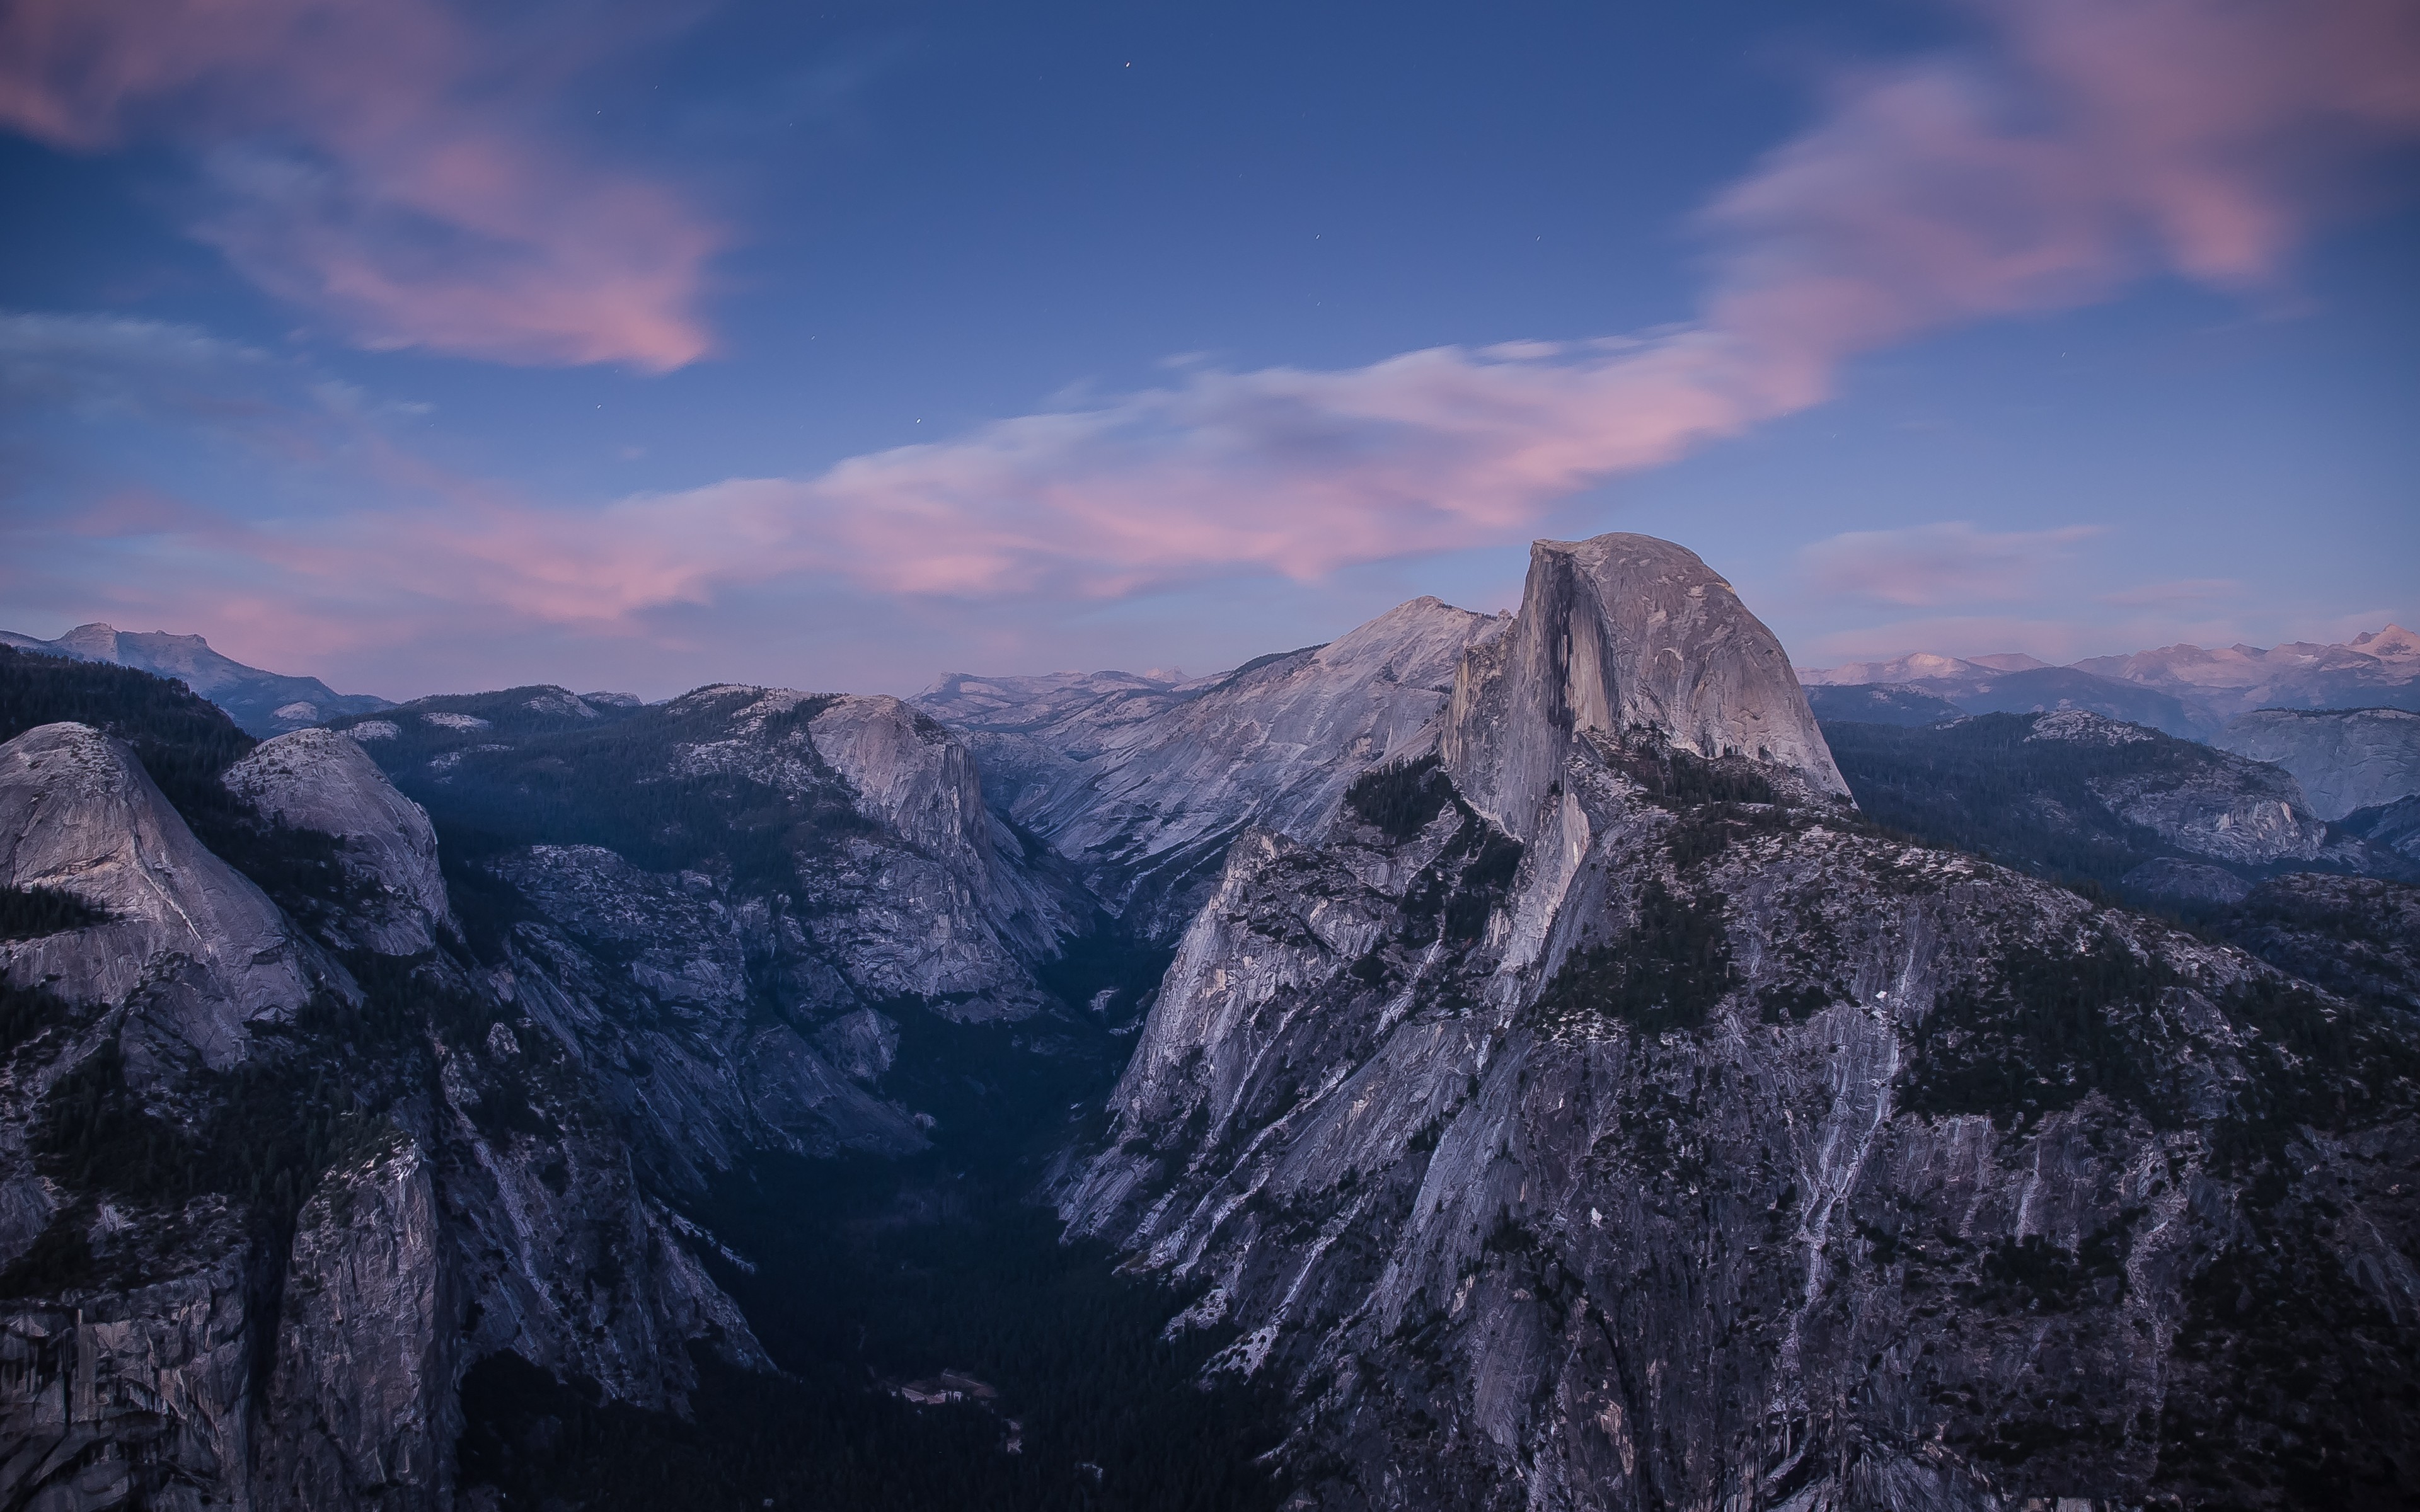 General 3840x2400 landscape mountains Yosemite National Park cliff valley national park USA California nature Half Dome